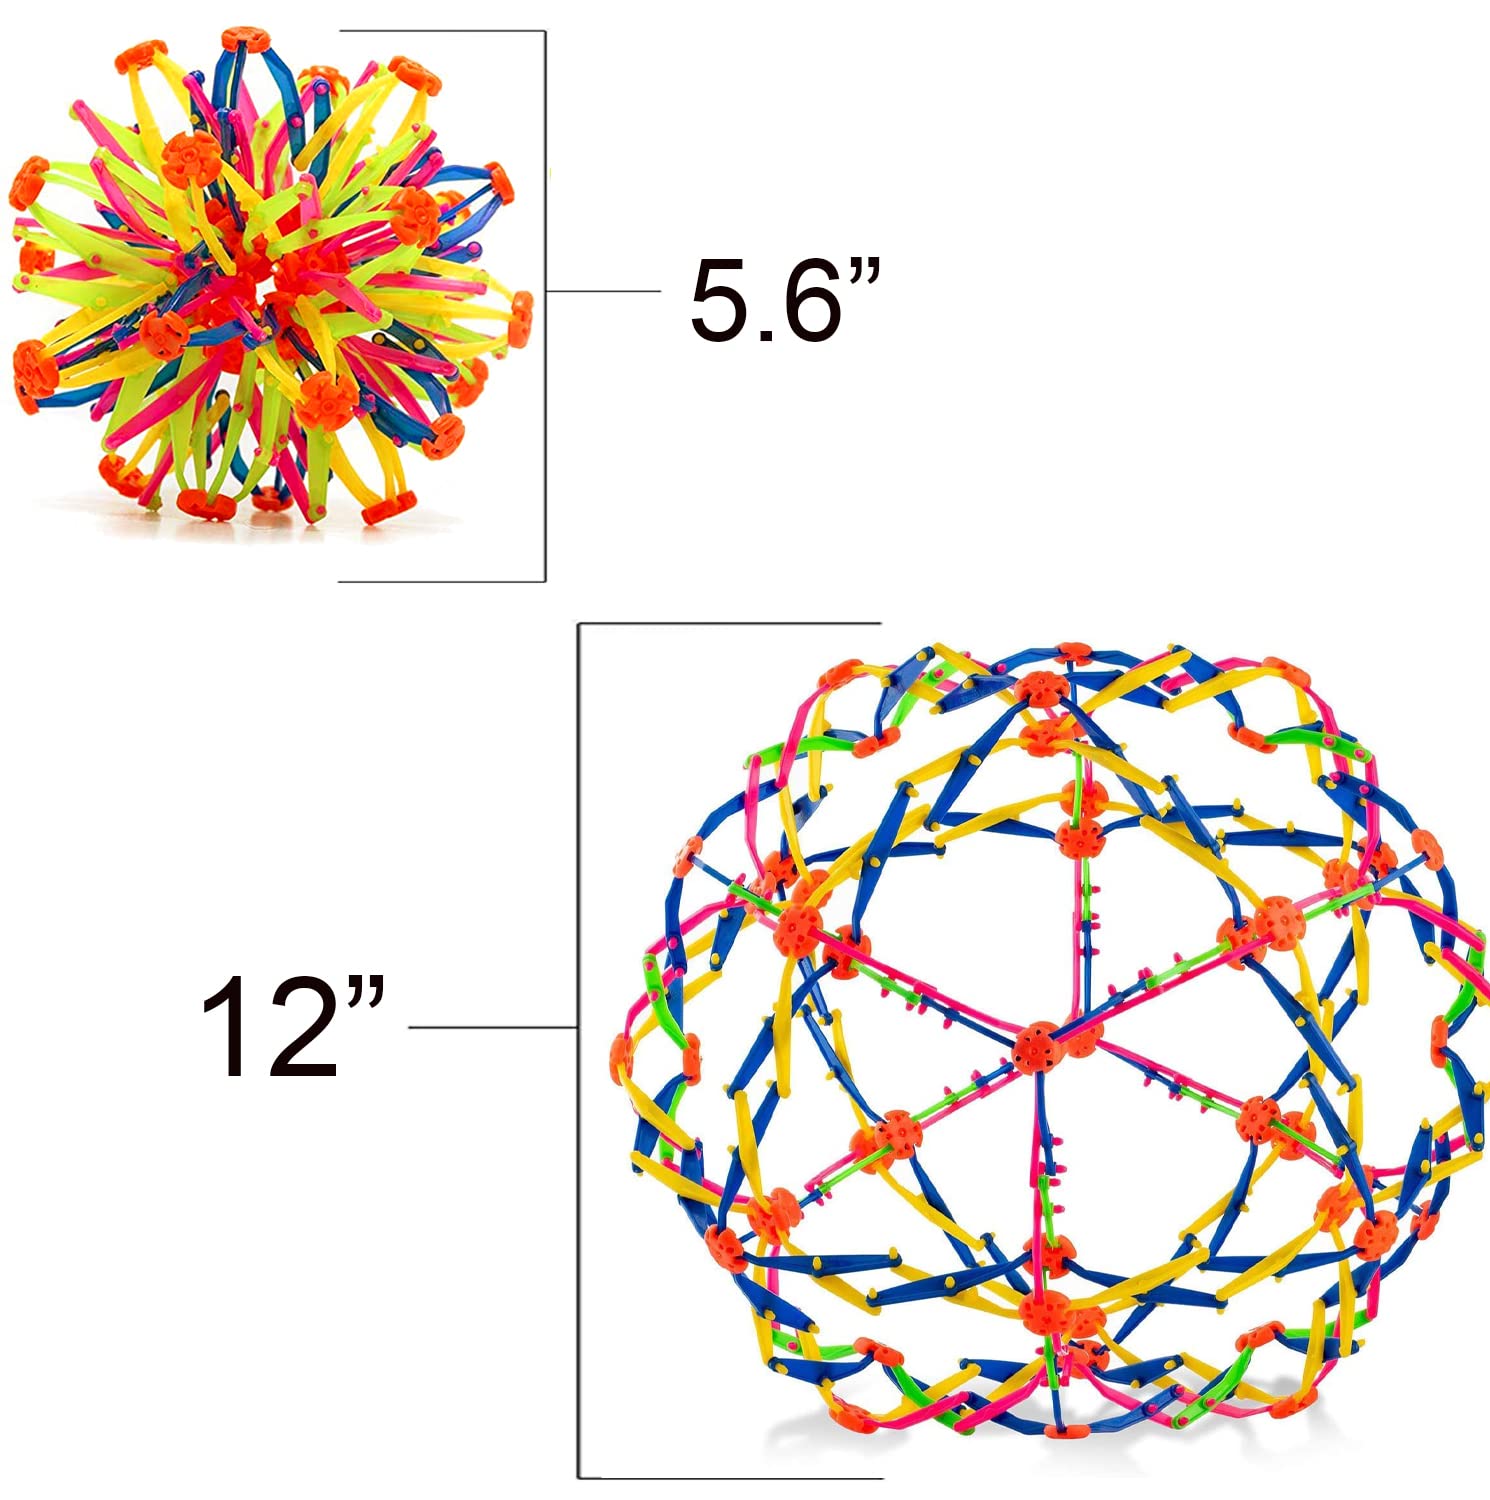 4E's Novelty Expandable Breathing Ball Toy Sphere for Kids Stress Reliever Fidget Toys Colors May Vary for Yoga Anxiety Relaxation Expands from 5.6" to 12"